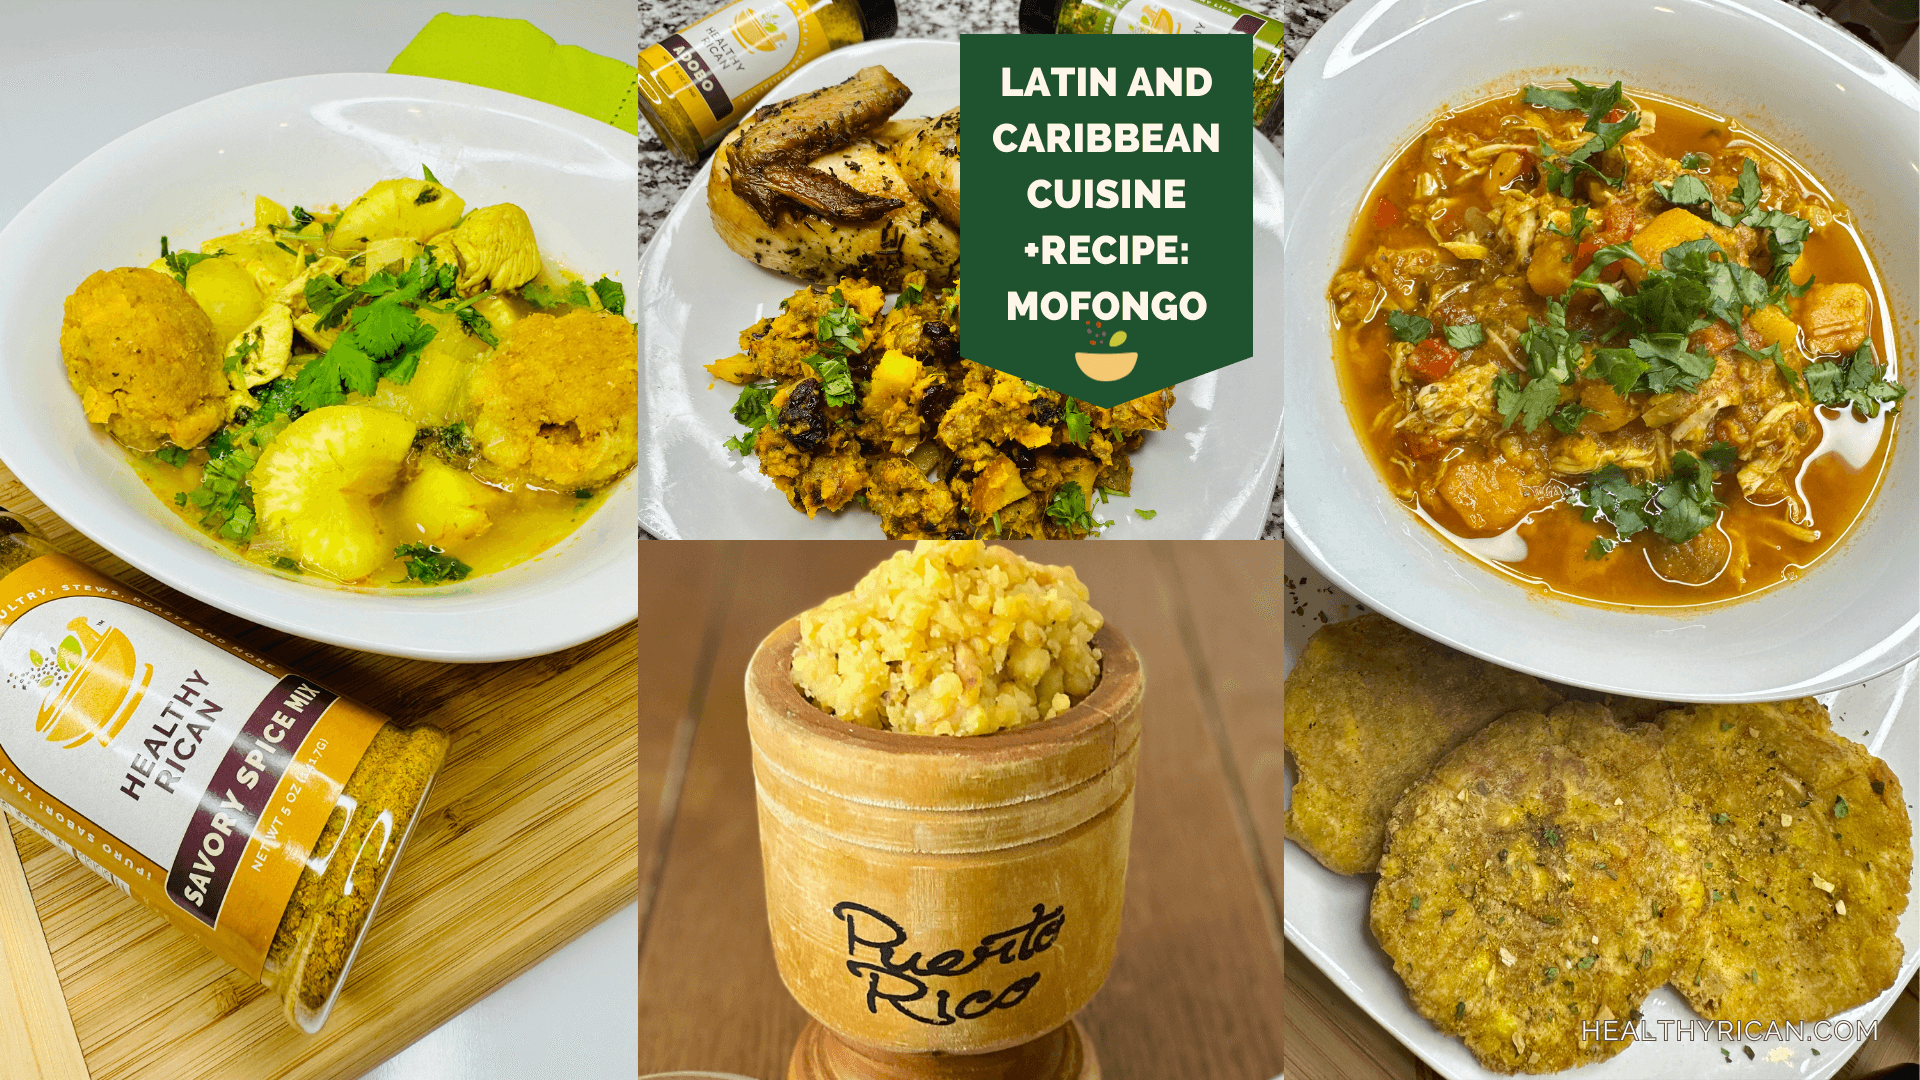 A beautifully plated serving of Mofongo, a traditional dish featuring a mound of mashed and seasoned fried green plantains, mixed with garlic, crispy pork cracklings (chicharrón), and garnished with fresh herbs. This flavorful dish is a staple in Latin and Caribbean cuisines.